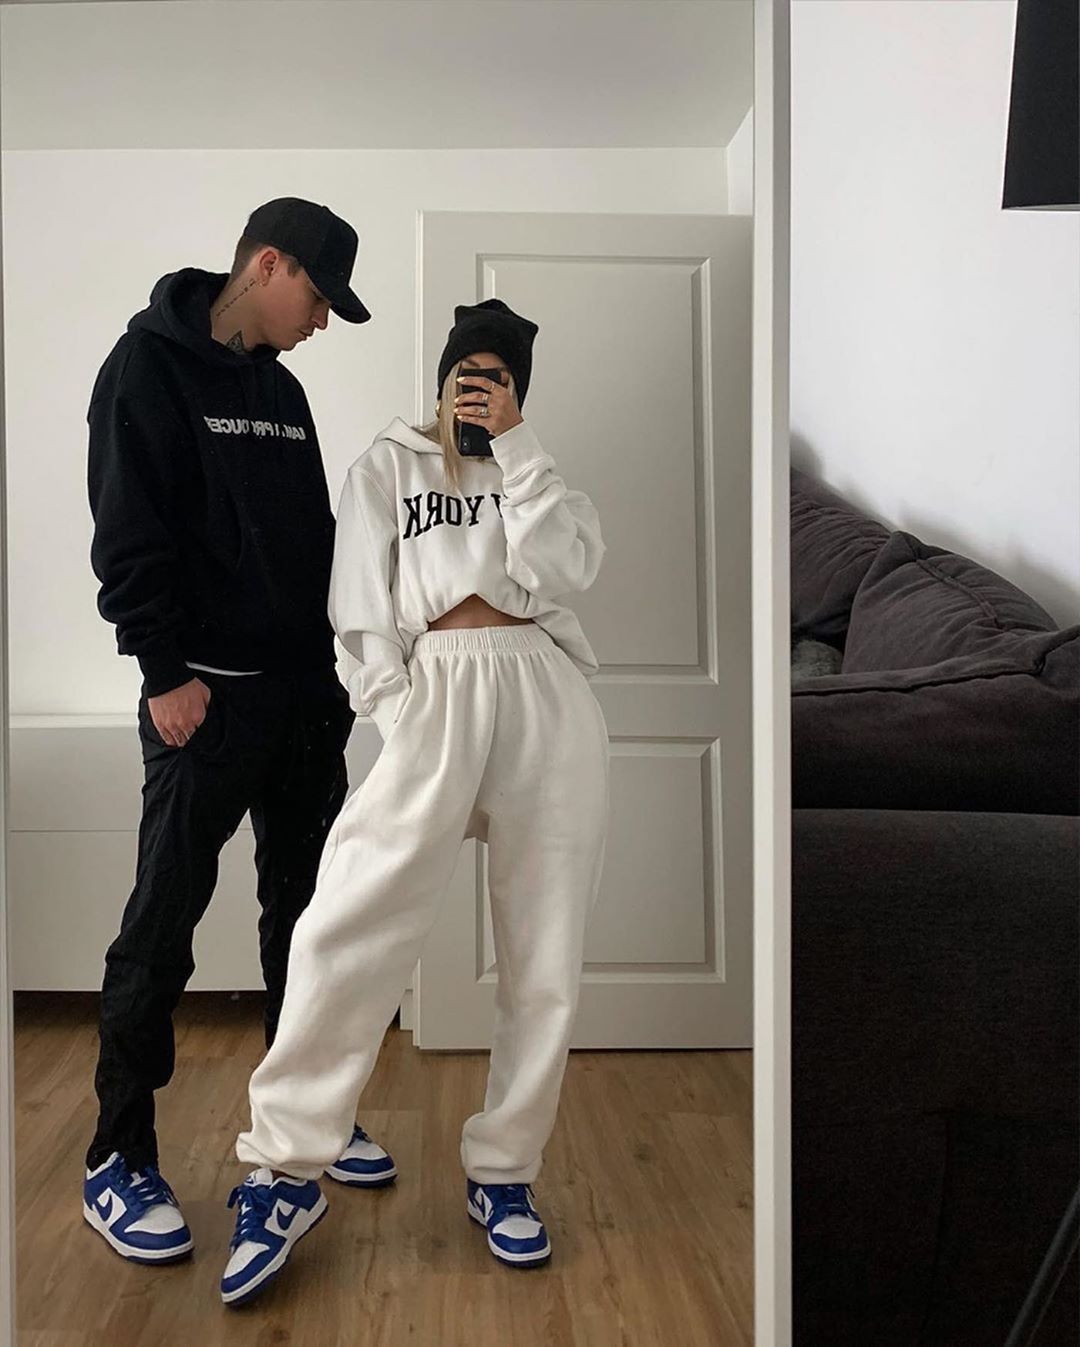 Streetwear on Instagram: “Couple styles 1, 2 or 3? | @lessiswore” - Streetwear on Instagram: “Couple styles 1, 2 or 3? | @lessiswore” -   fitness Outfits couple